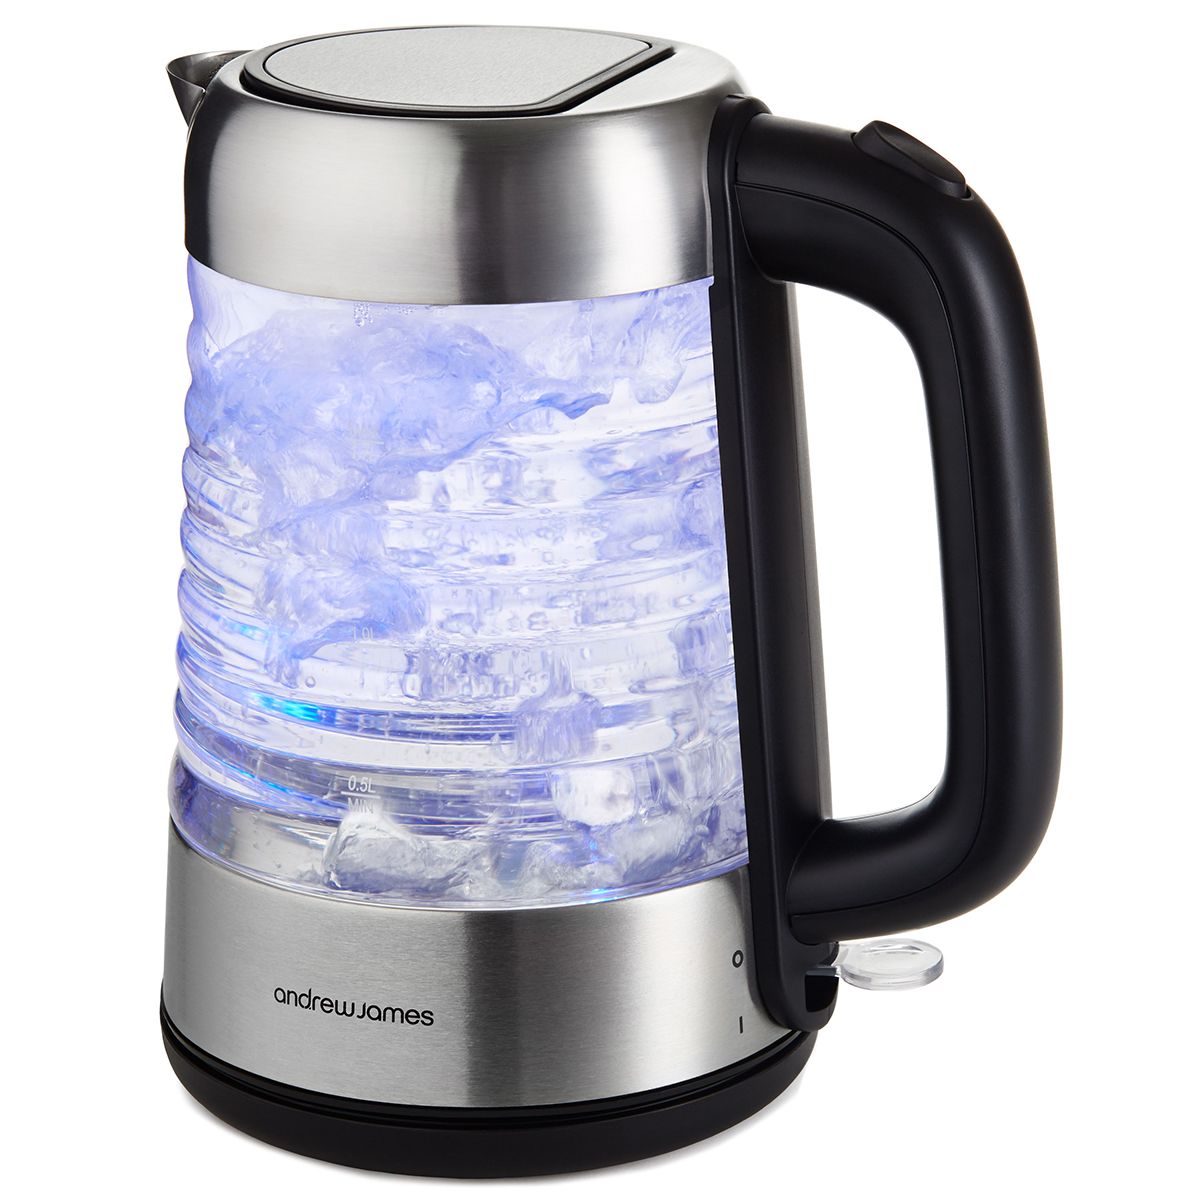 salter glass kettle review